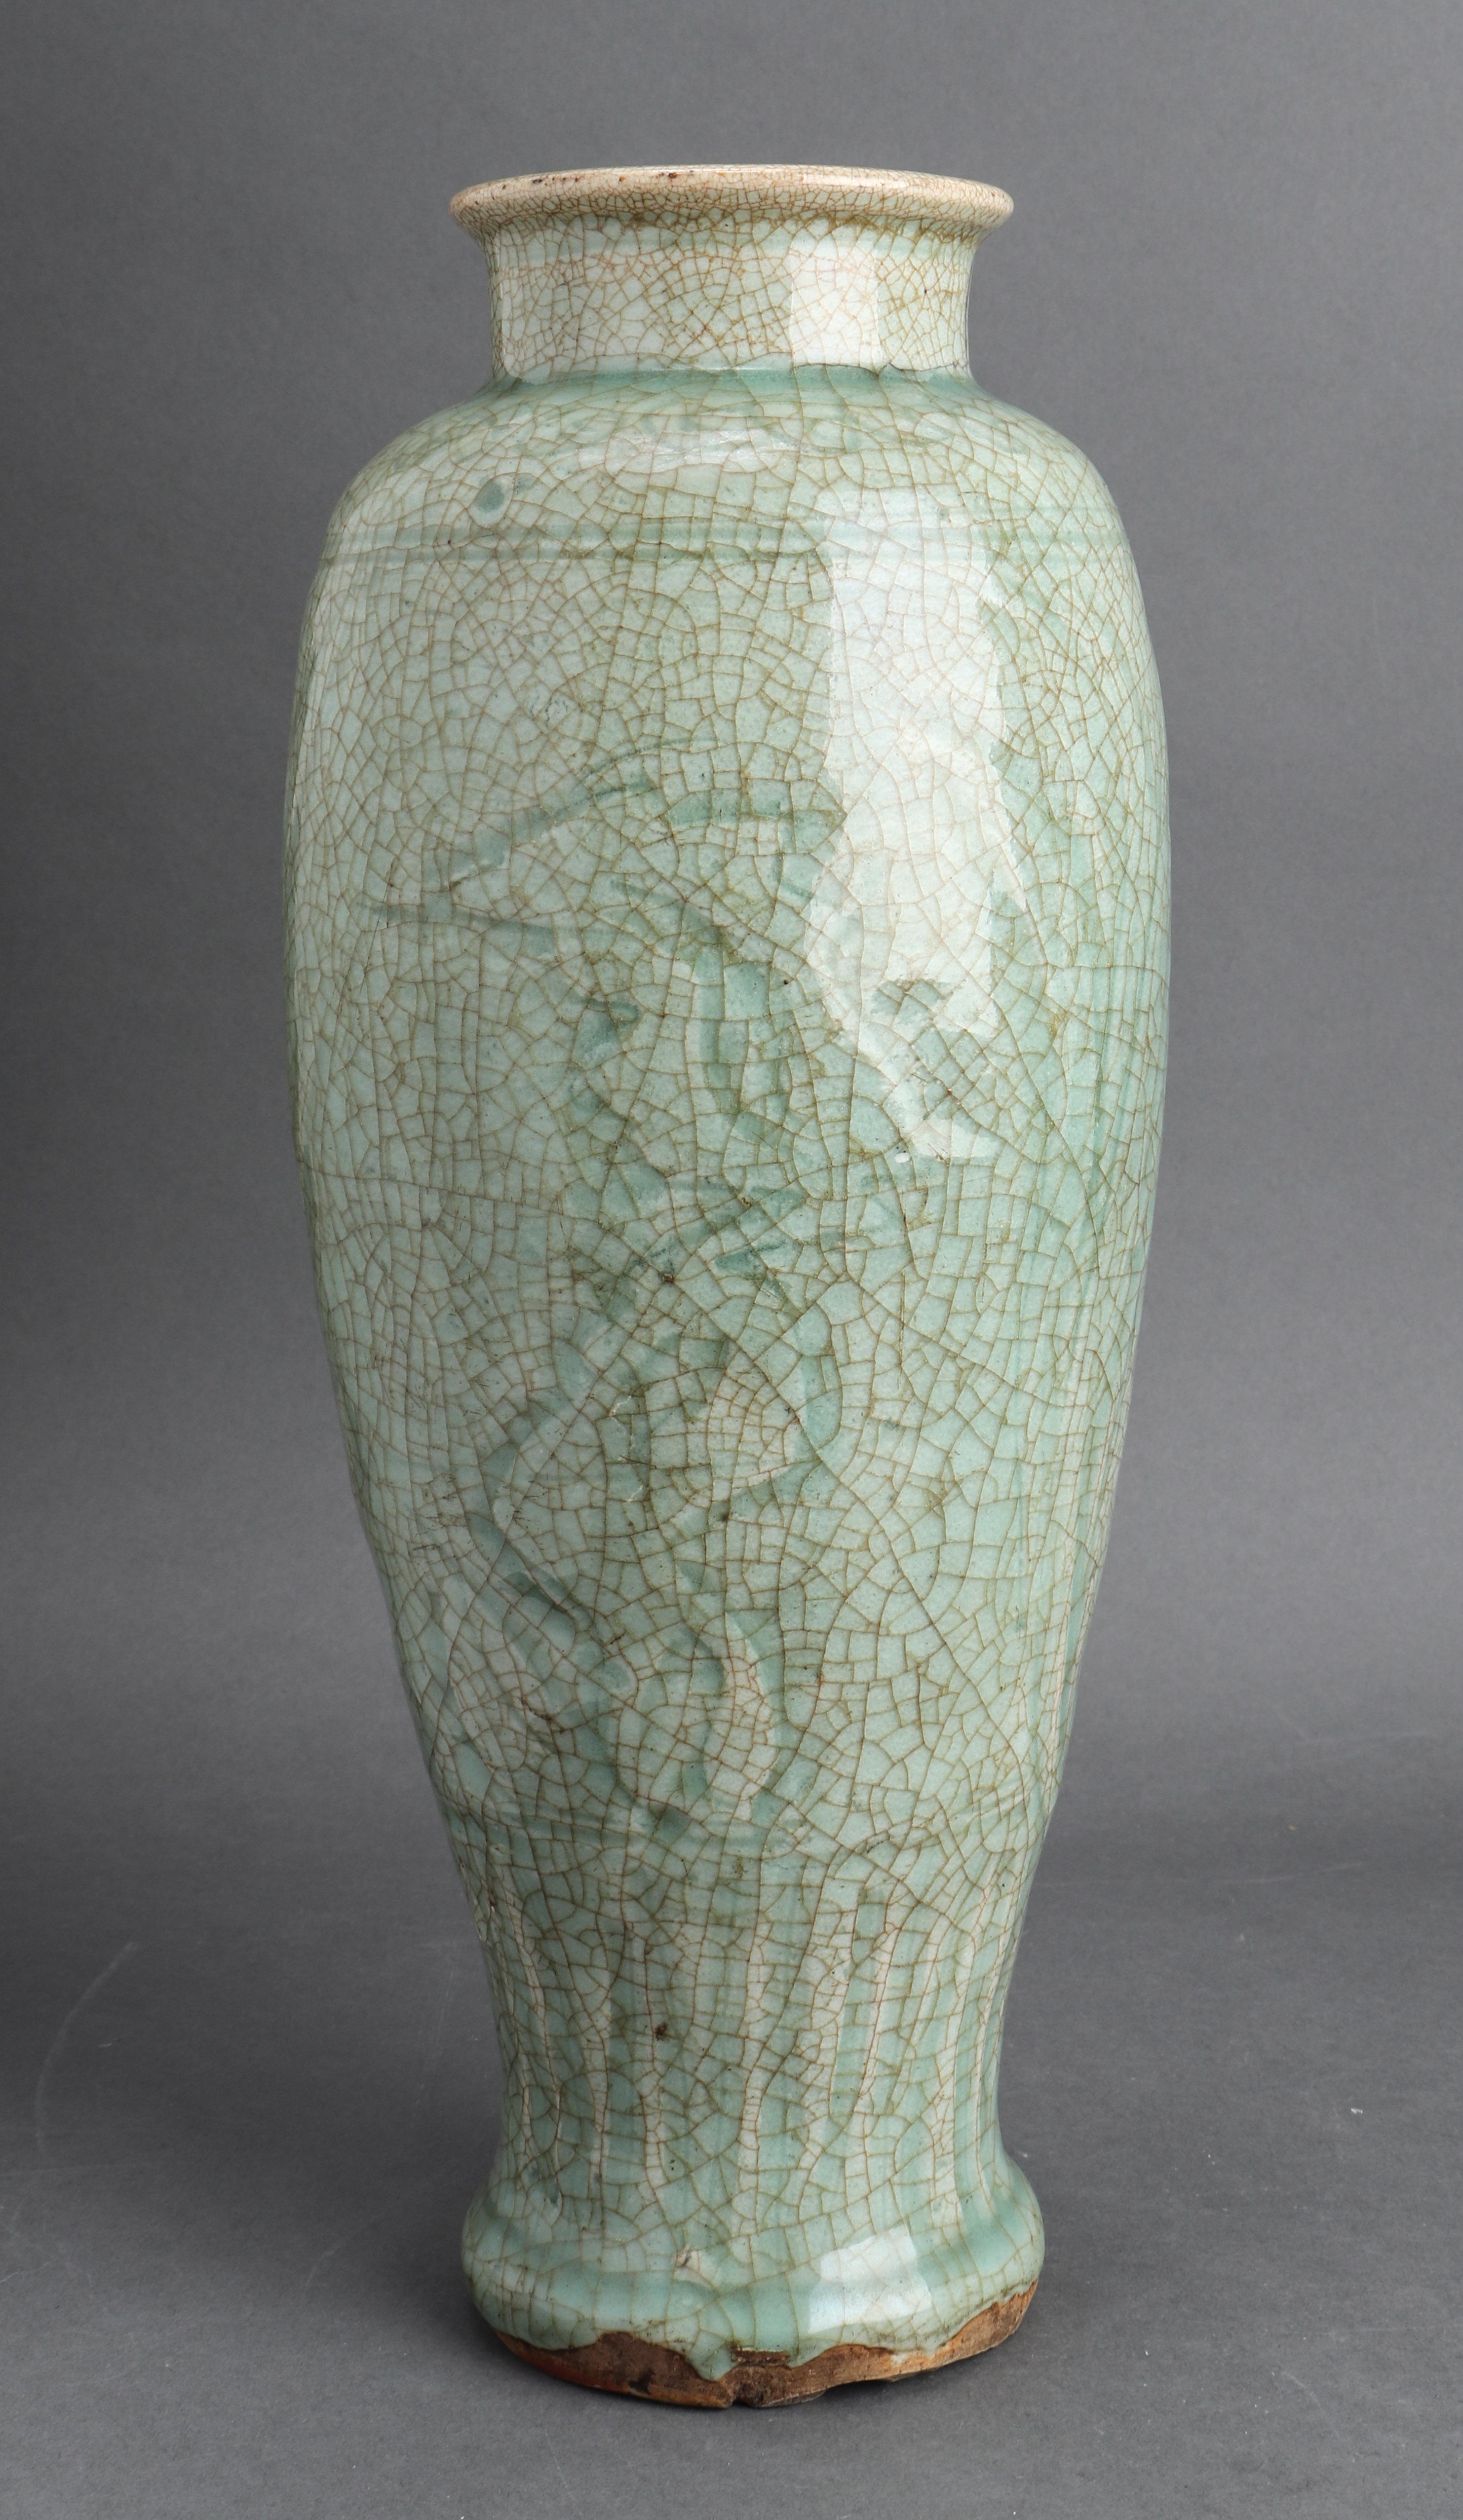 Chinese Ming dynasty (1368-1644) Longquan celadon glazed vase, porcelain with overall crackle glaze, lightly carved and line decoration to underglaze, bottom bears old collection paper label. Measures: 12.75